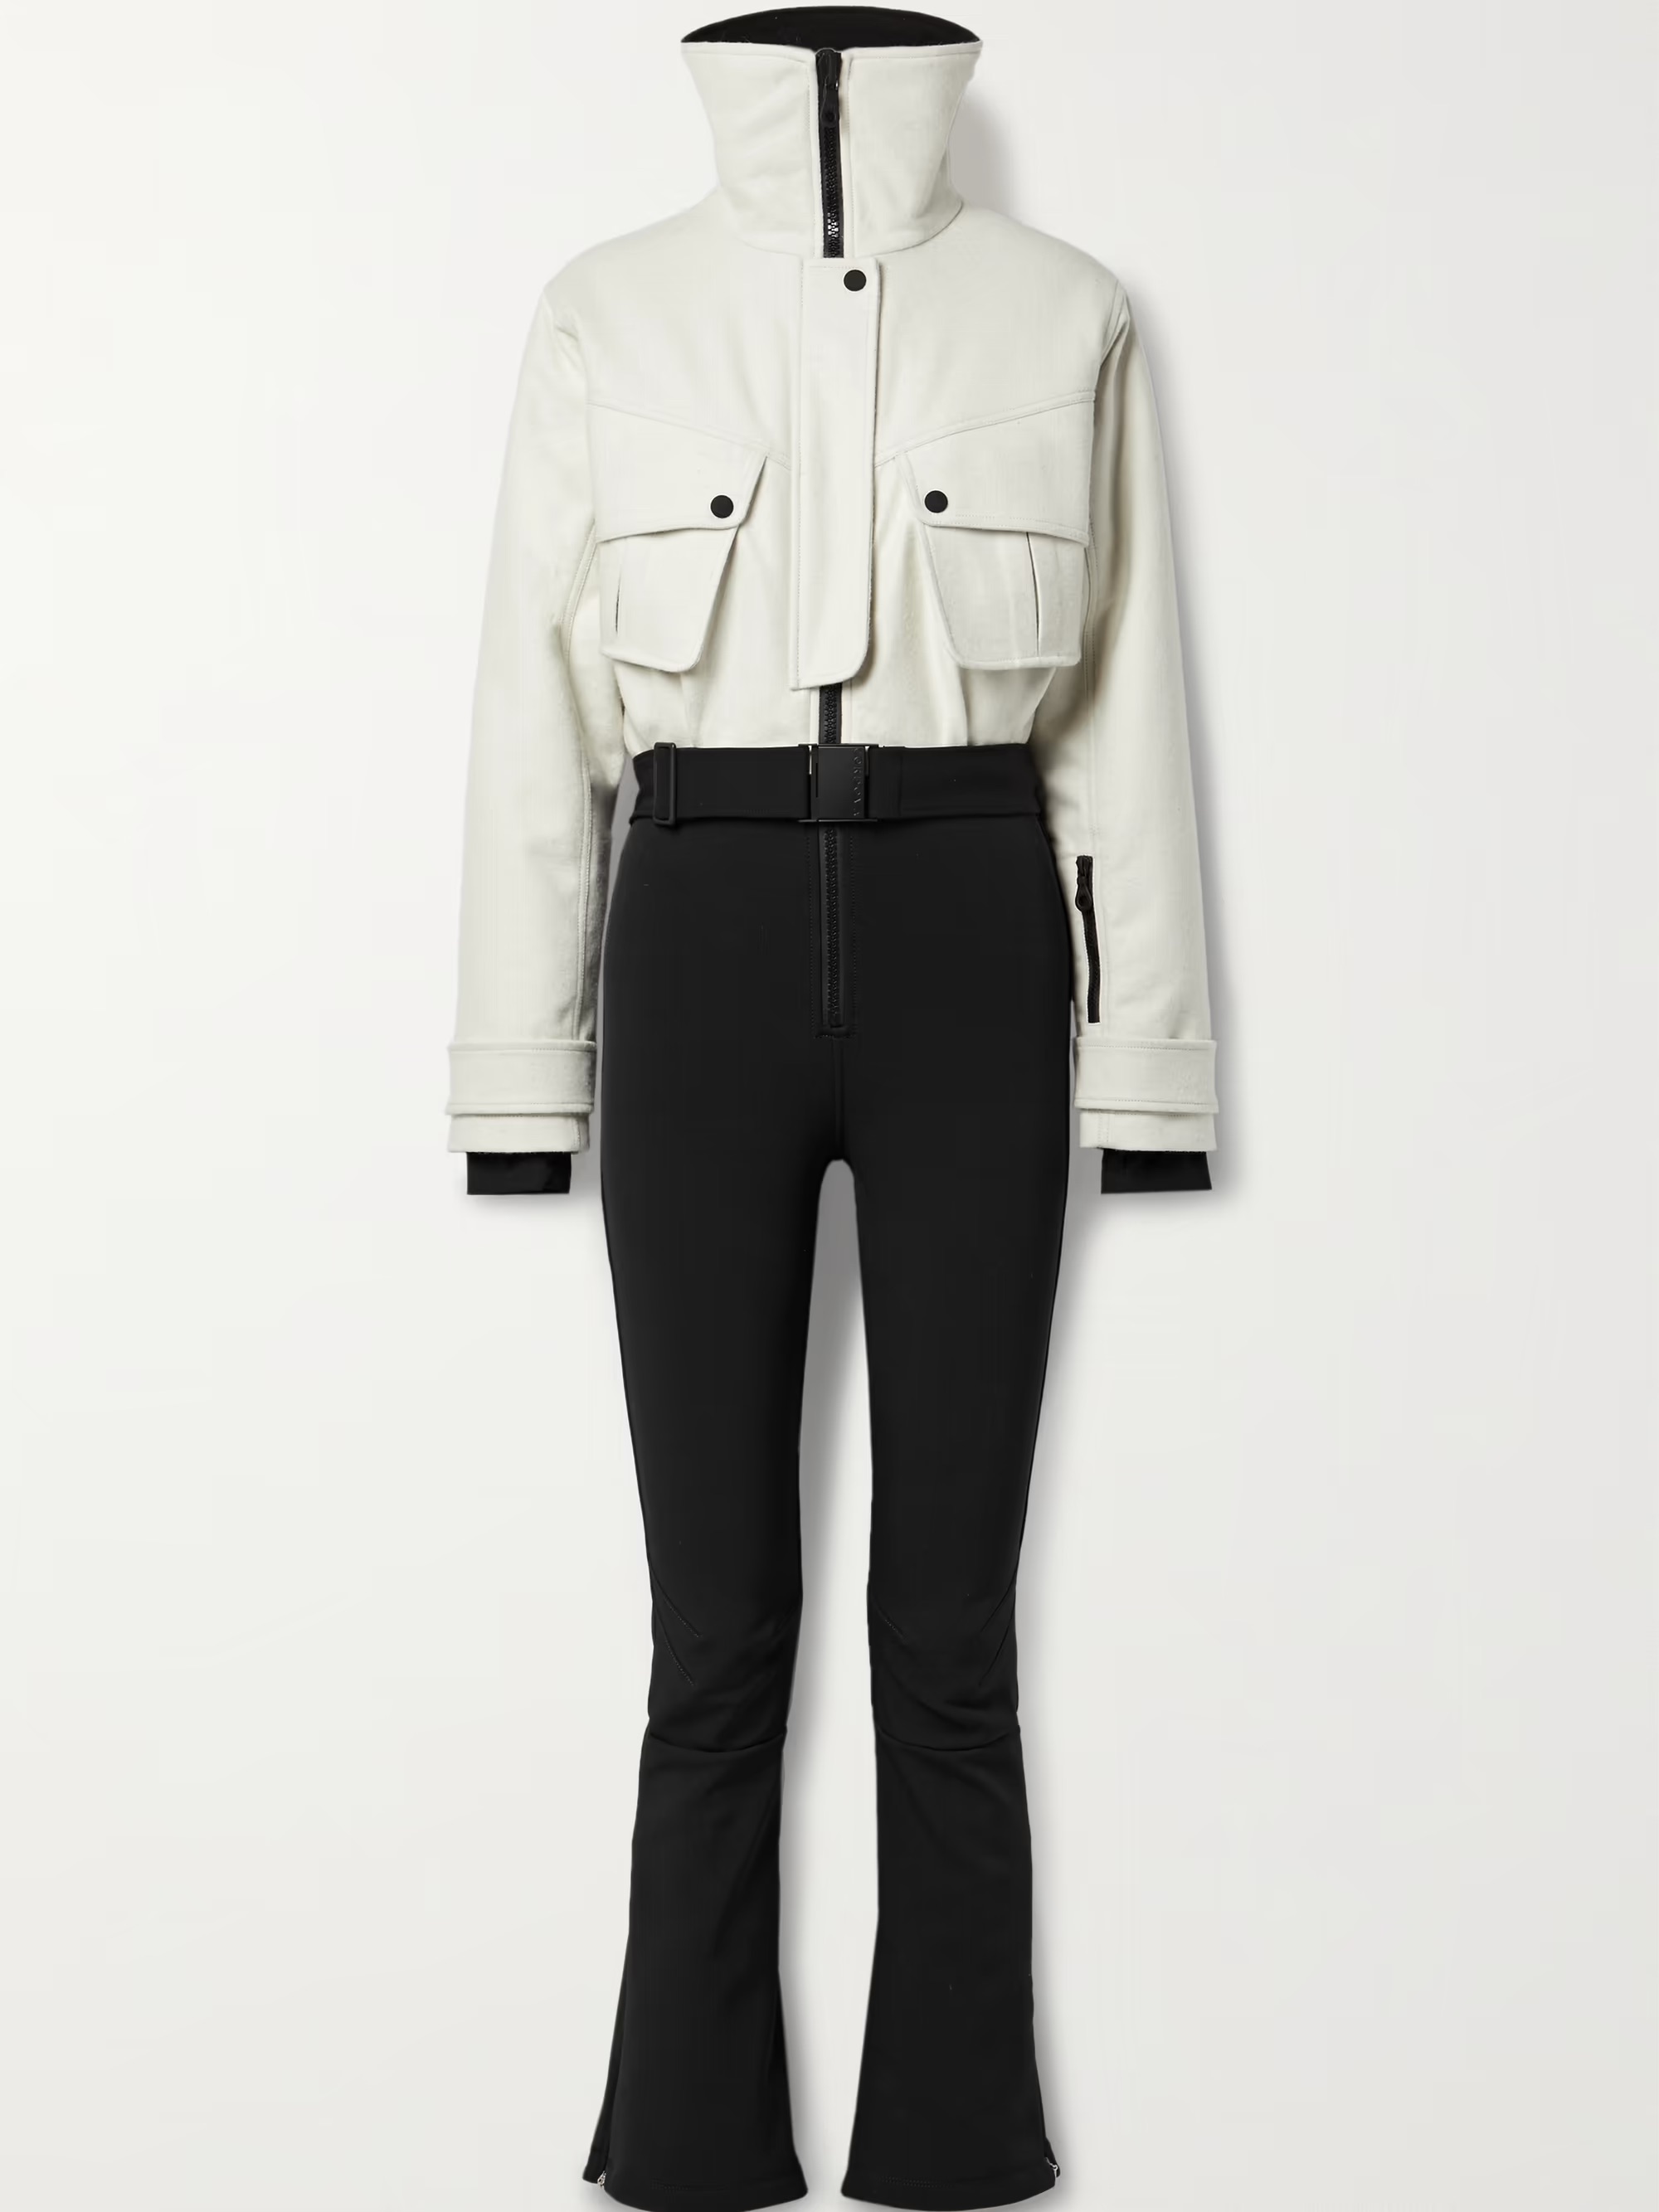 Cordova + The Telluride Belted Two-Tone Wool-Blend and Twill Ski Suit